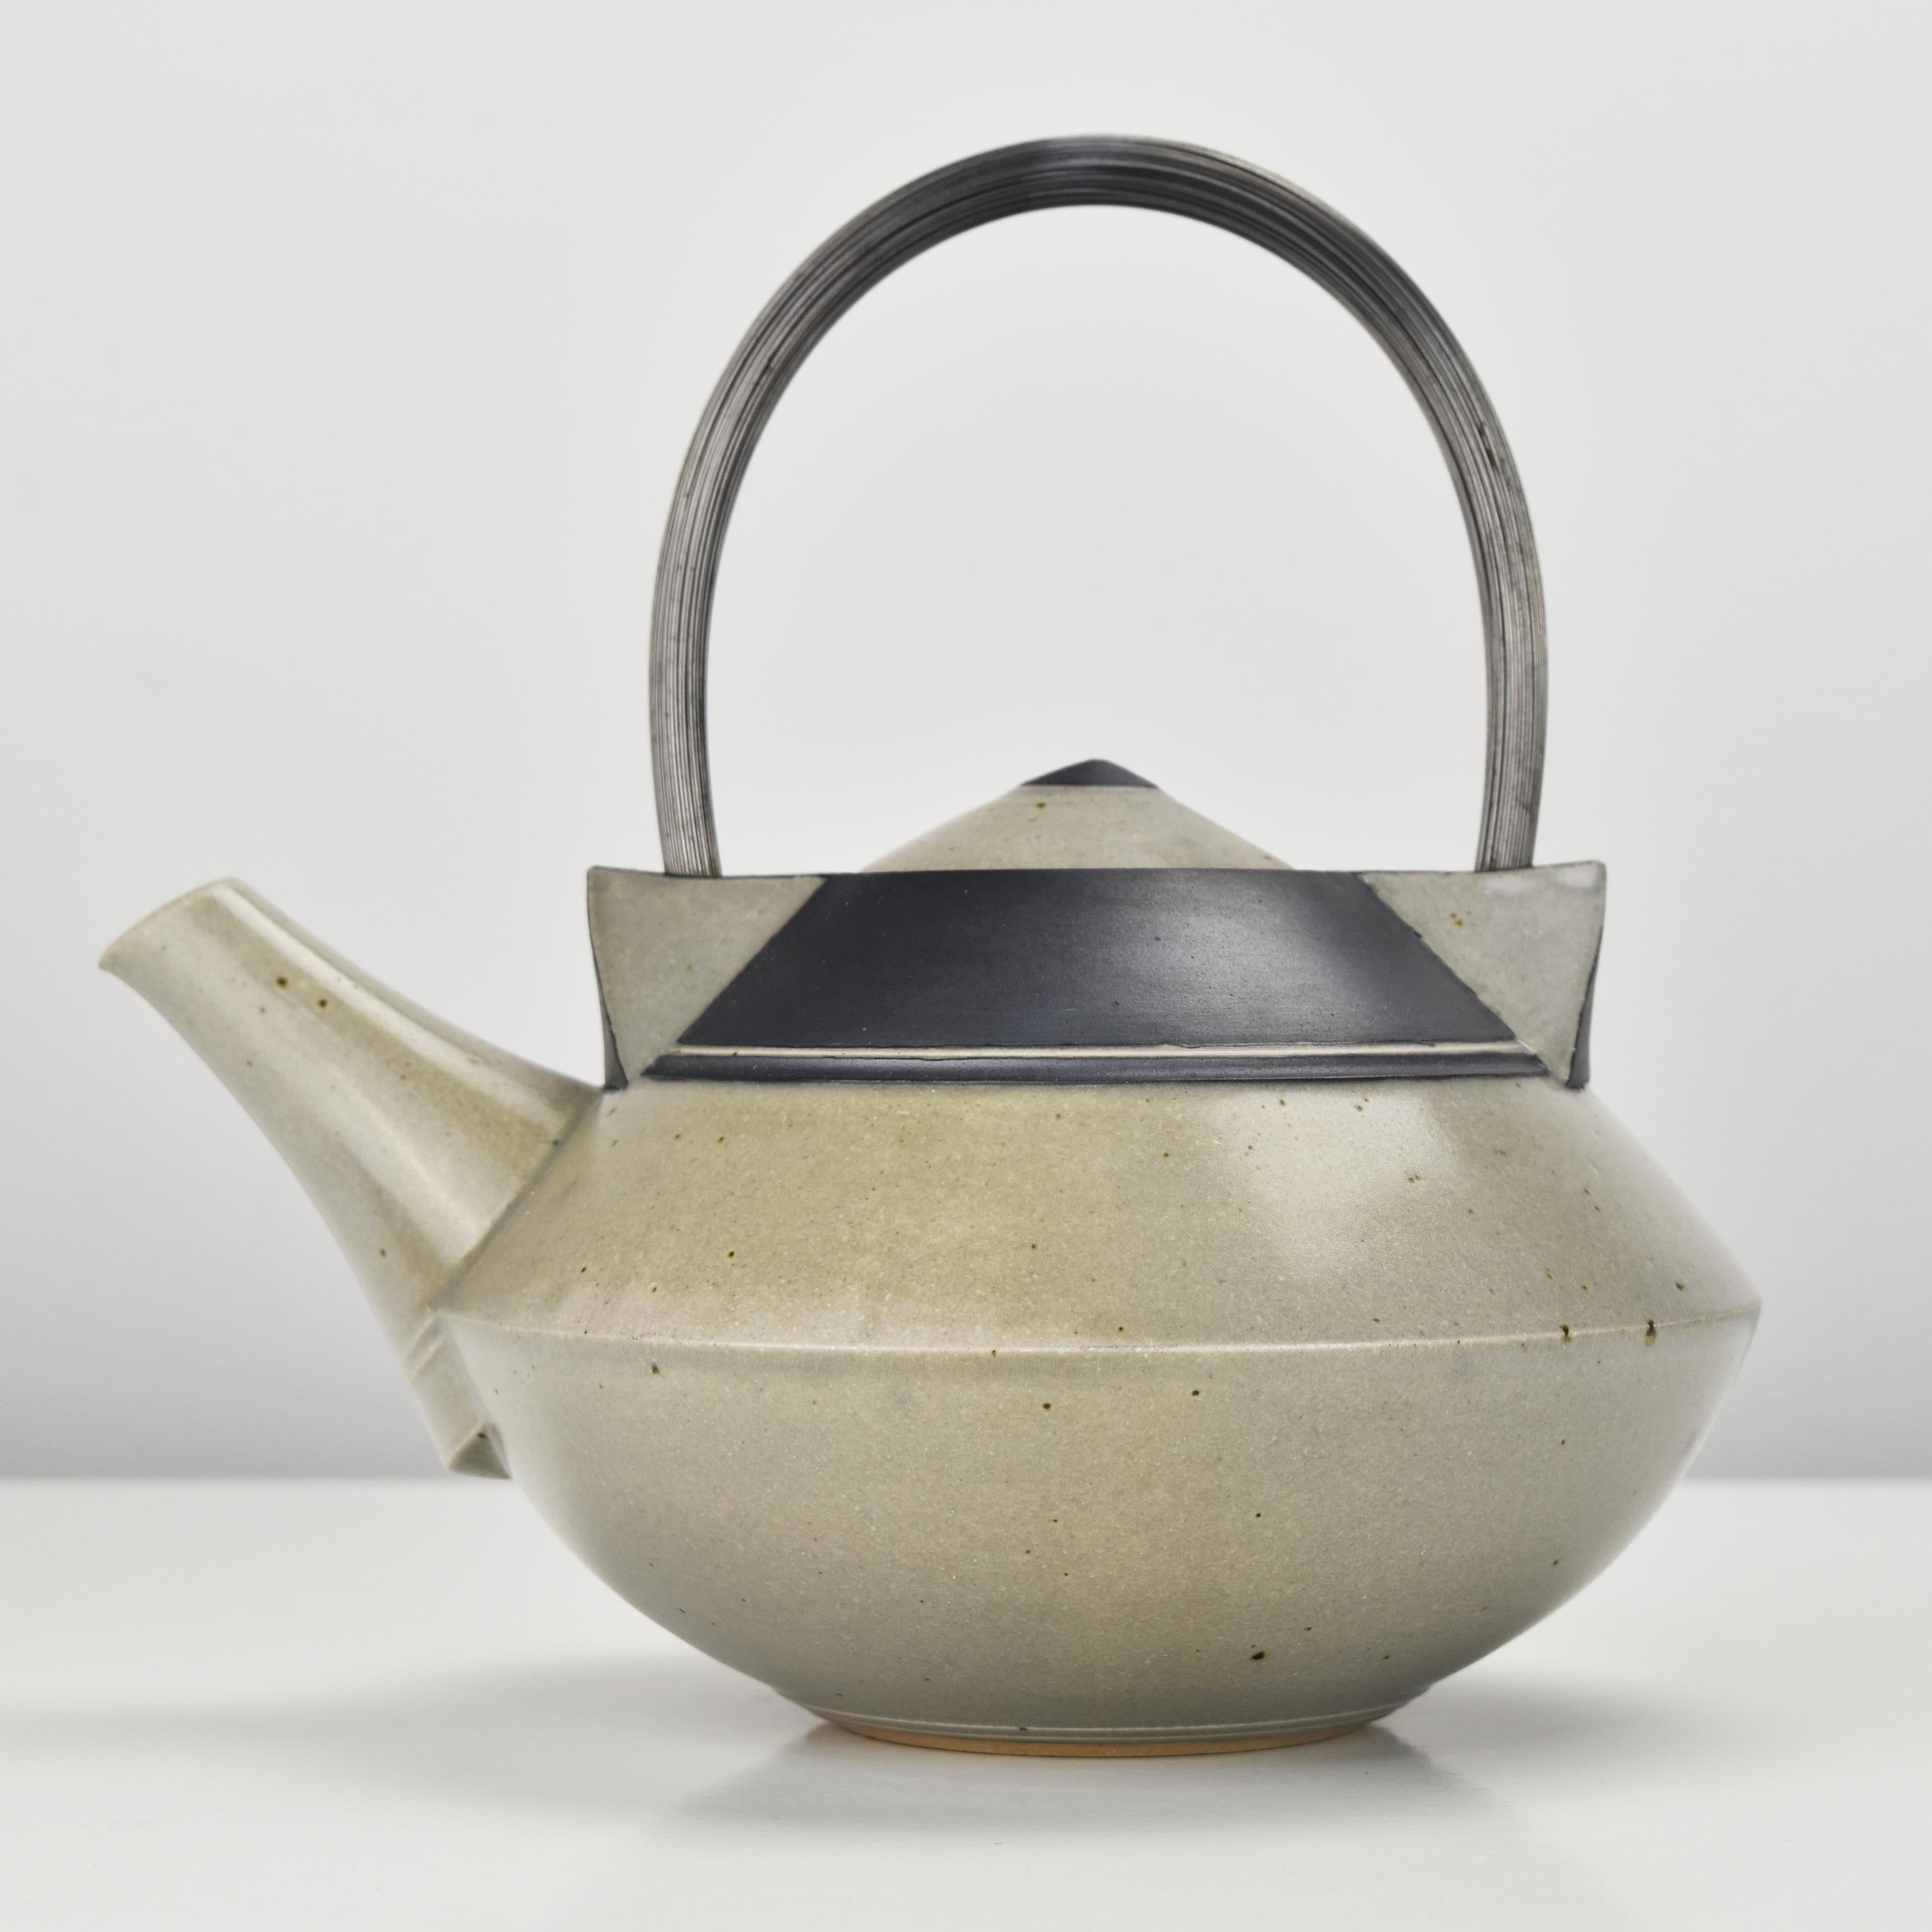 This stoneware teapot is a true masterpiece of modern studio ceramics. It features a dissolved surface glazed in a combination of semi-gloss stoneware with matte black accents. The handle, made of a many of stainless steel wires, is particularly